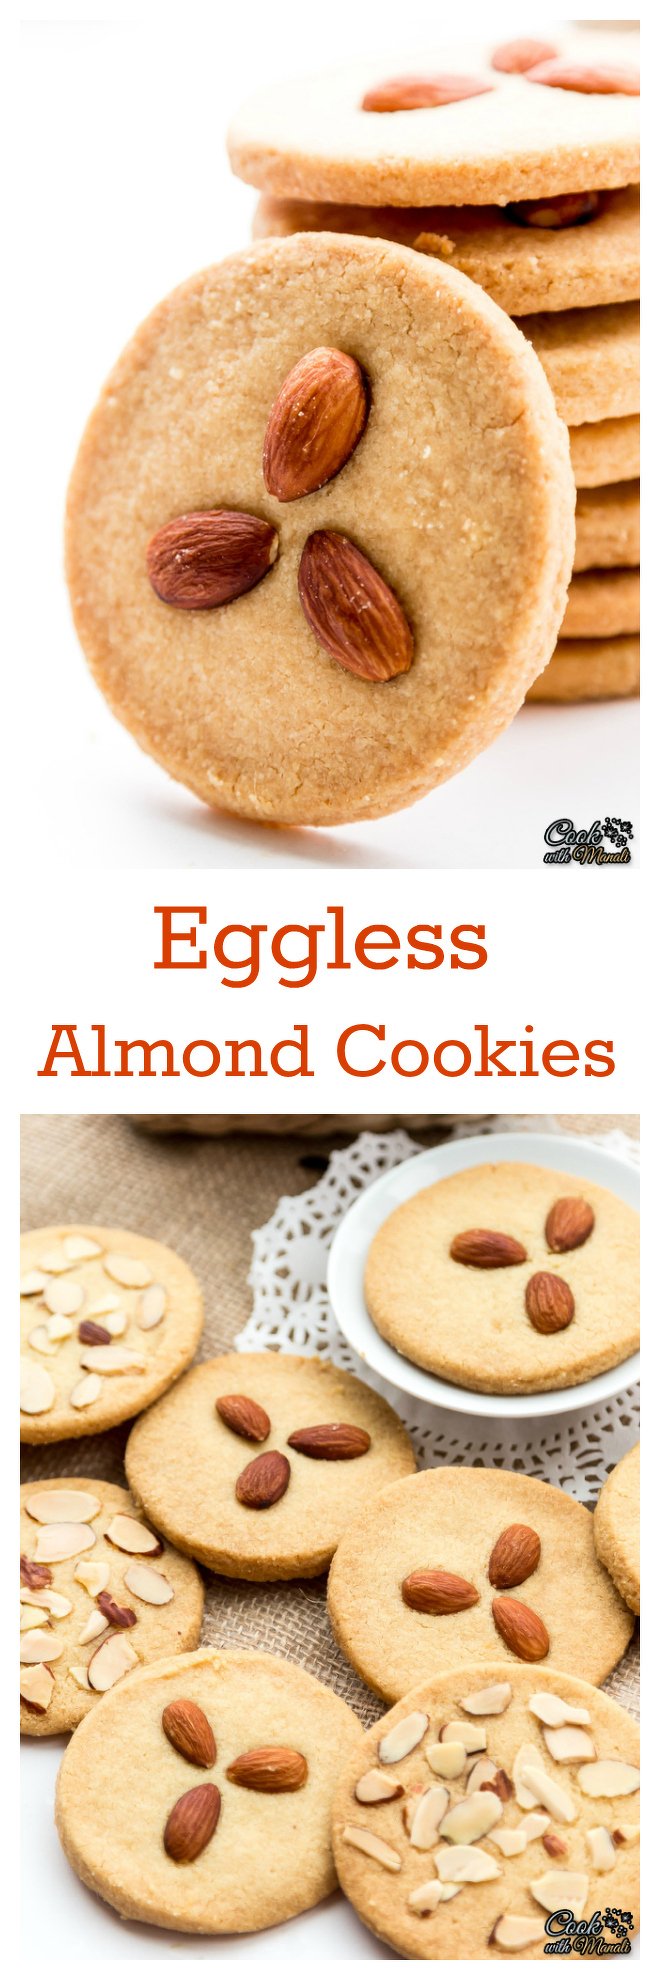 Eggless-Almond-Cookies-Collage-nocwm